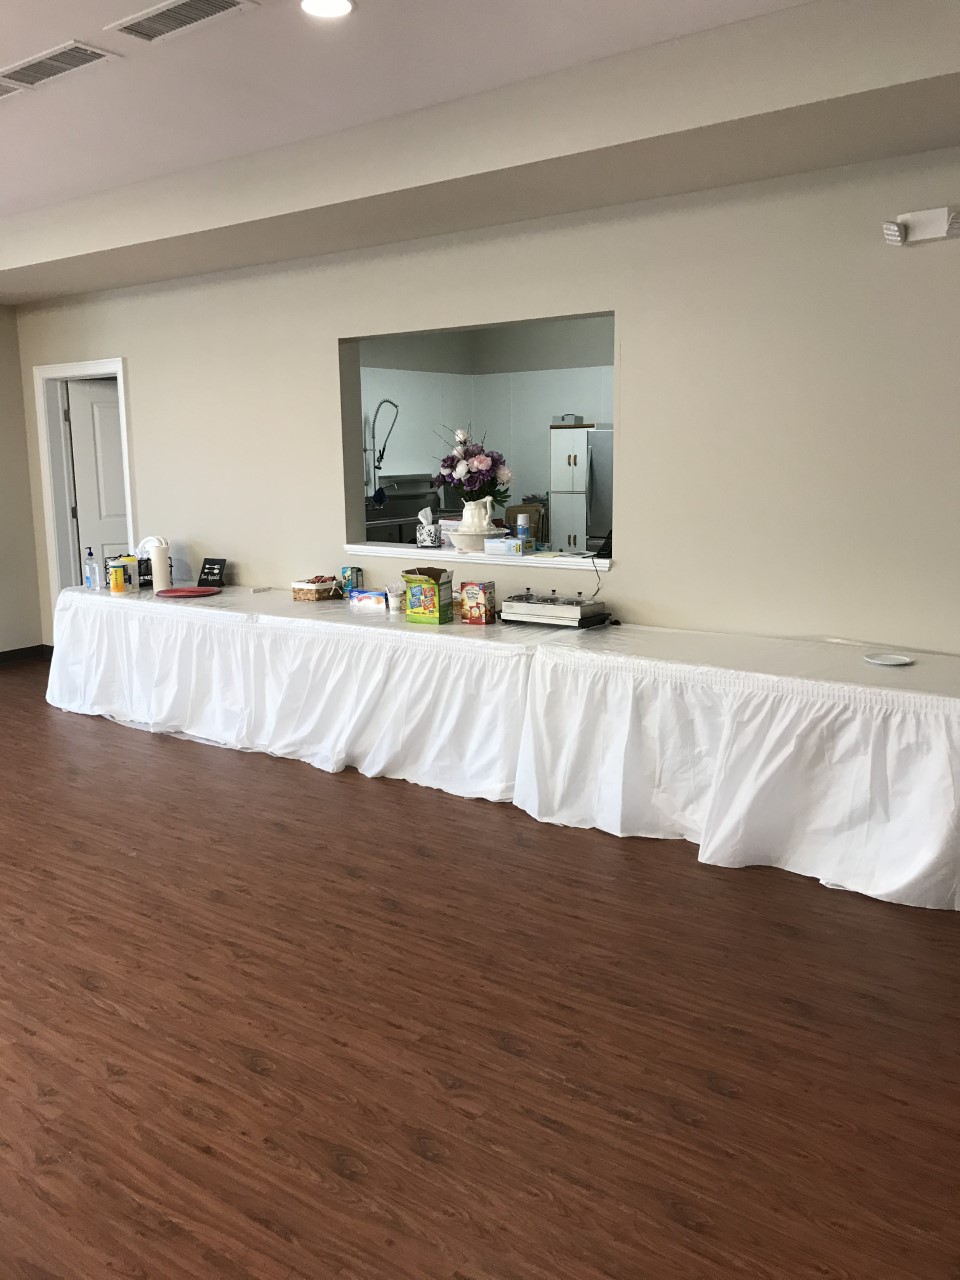 Food serving area in the hall